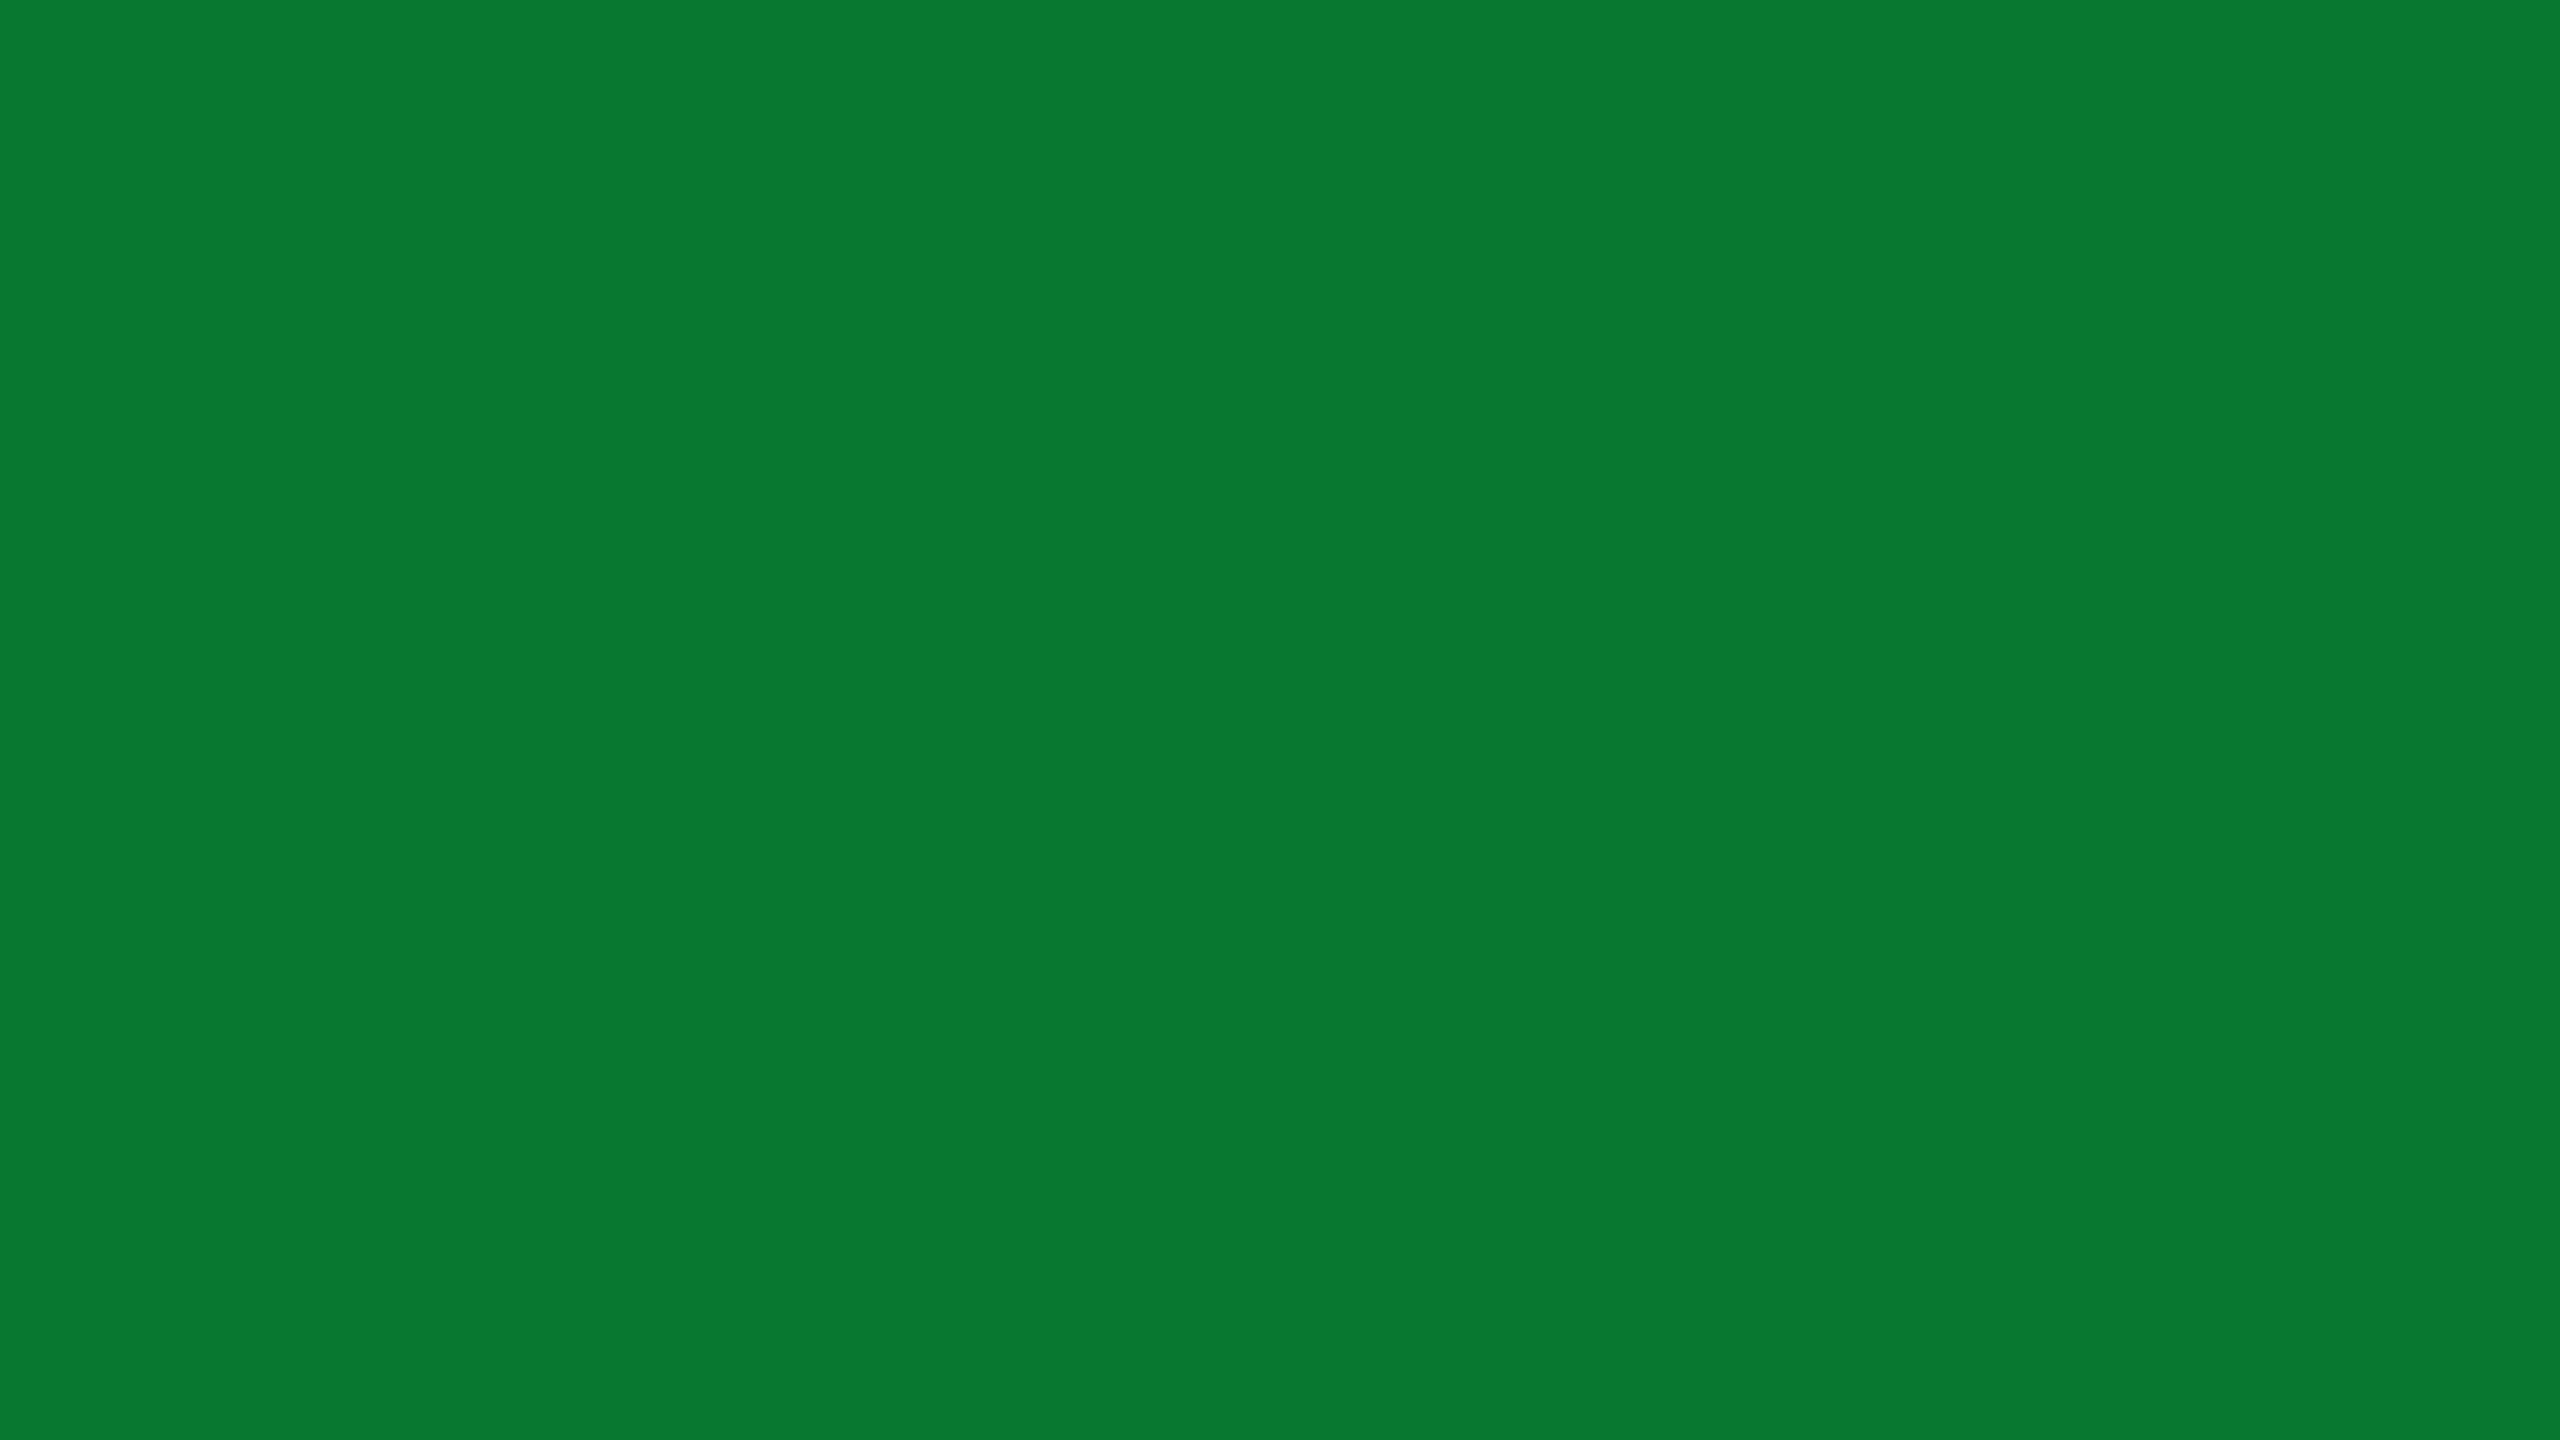 Background Color Solid Green Salle Image